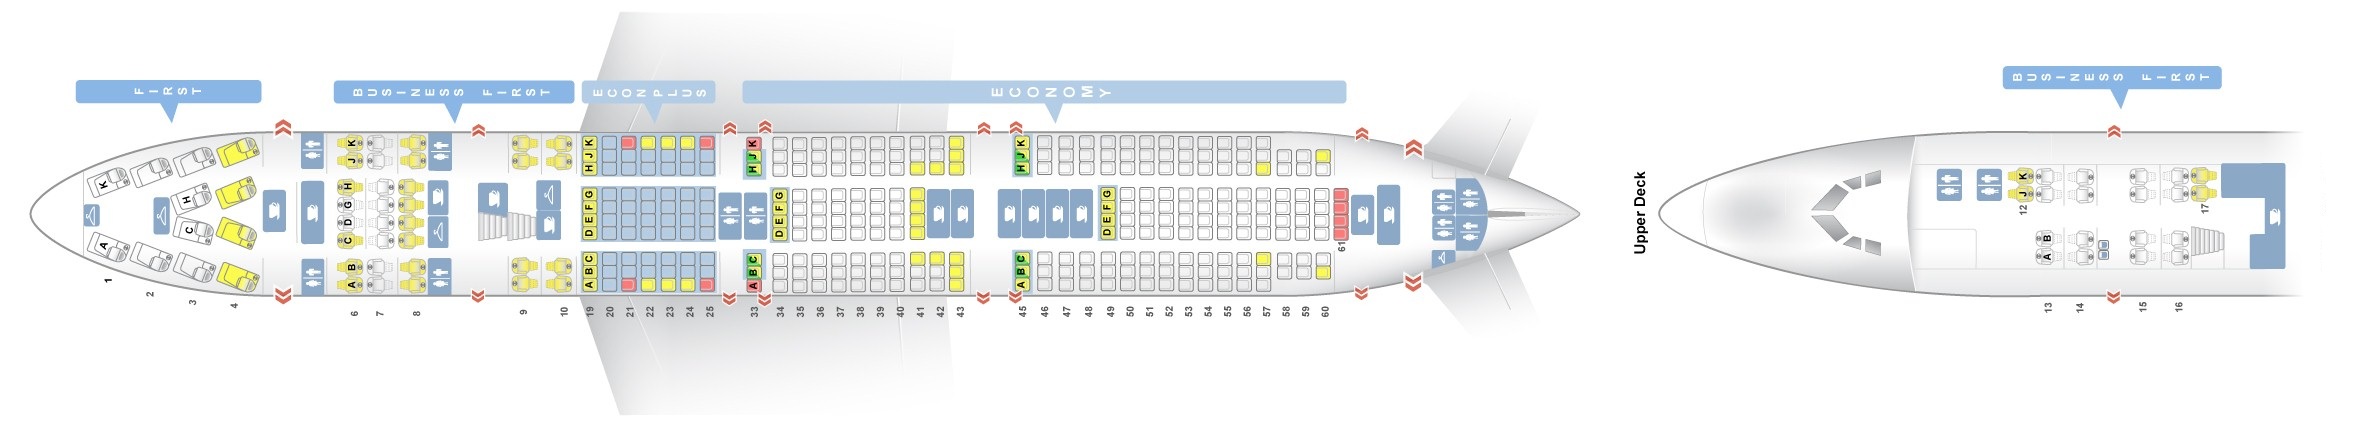 747 400 Seating Chart United Airlines